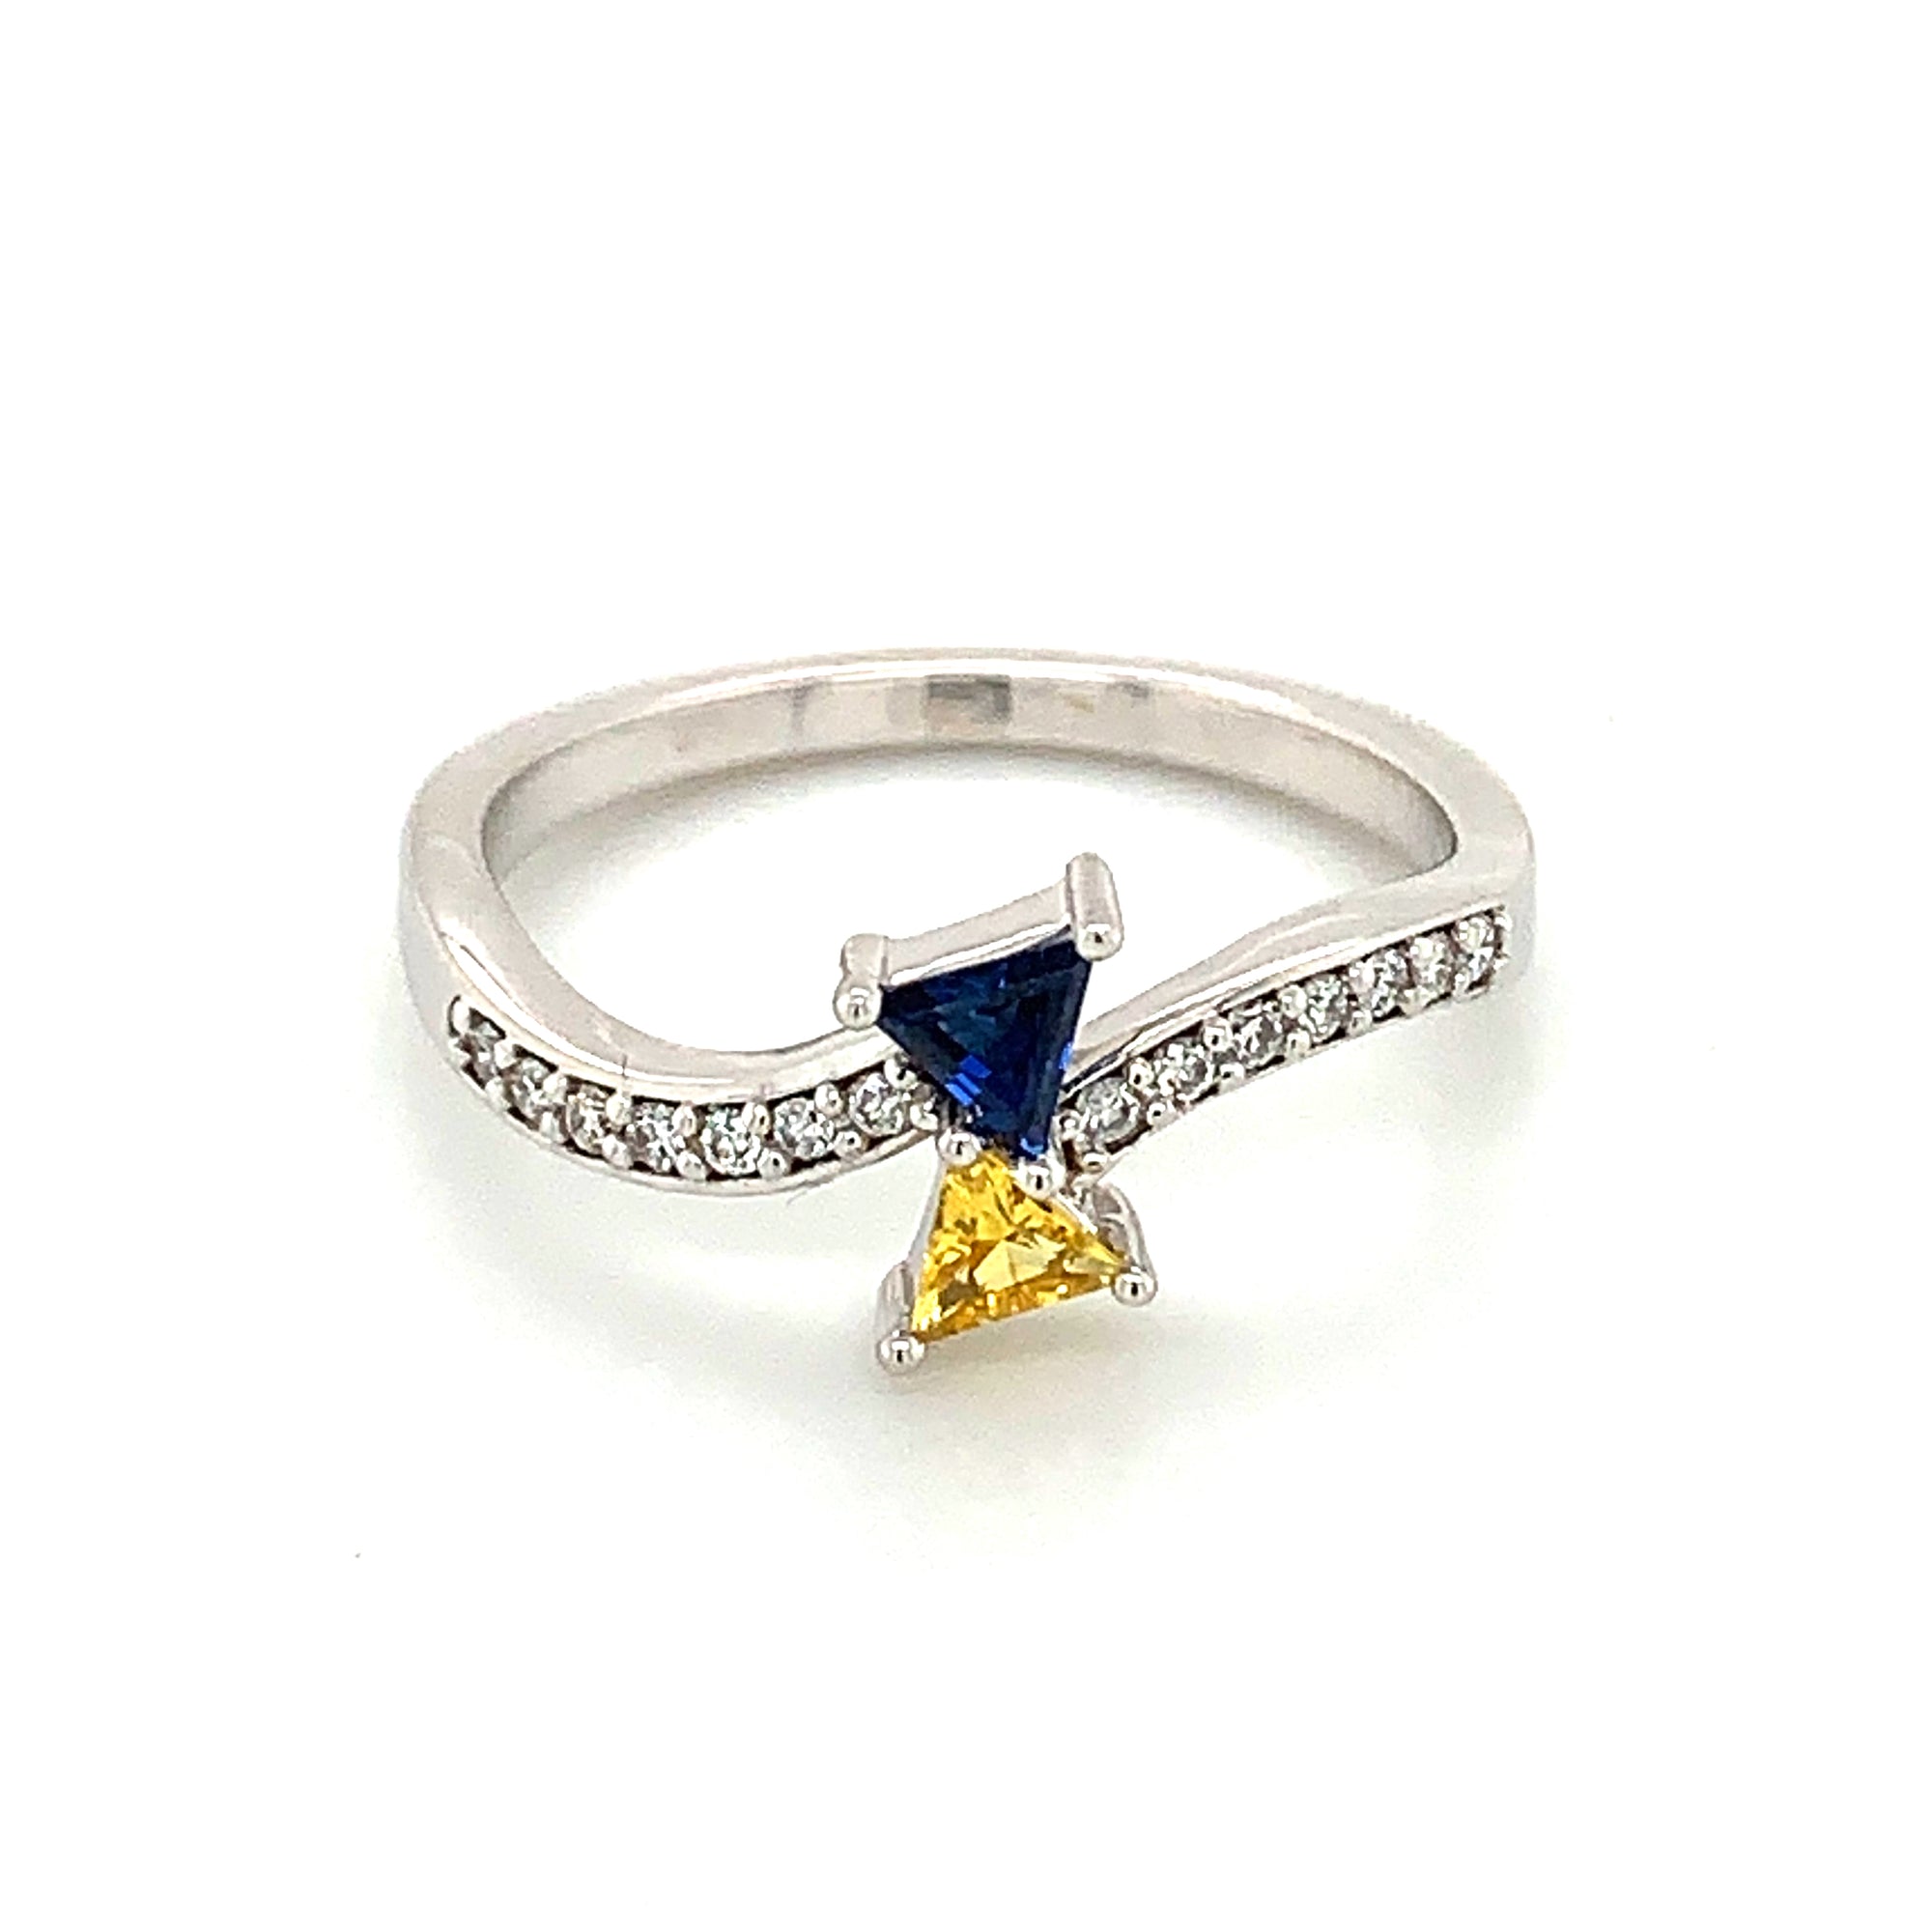 14K White Gold Triangle Cut Blue & Yellow Sapphire Ring with Diamond Accents